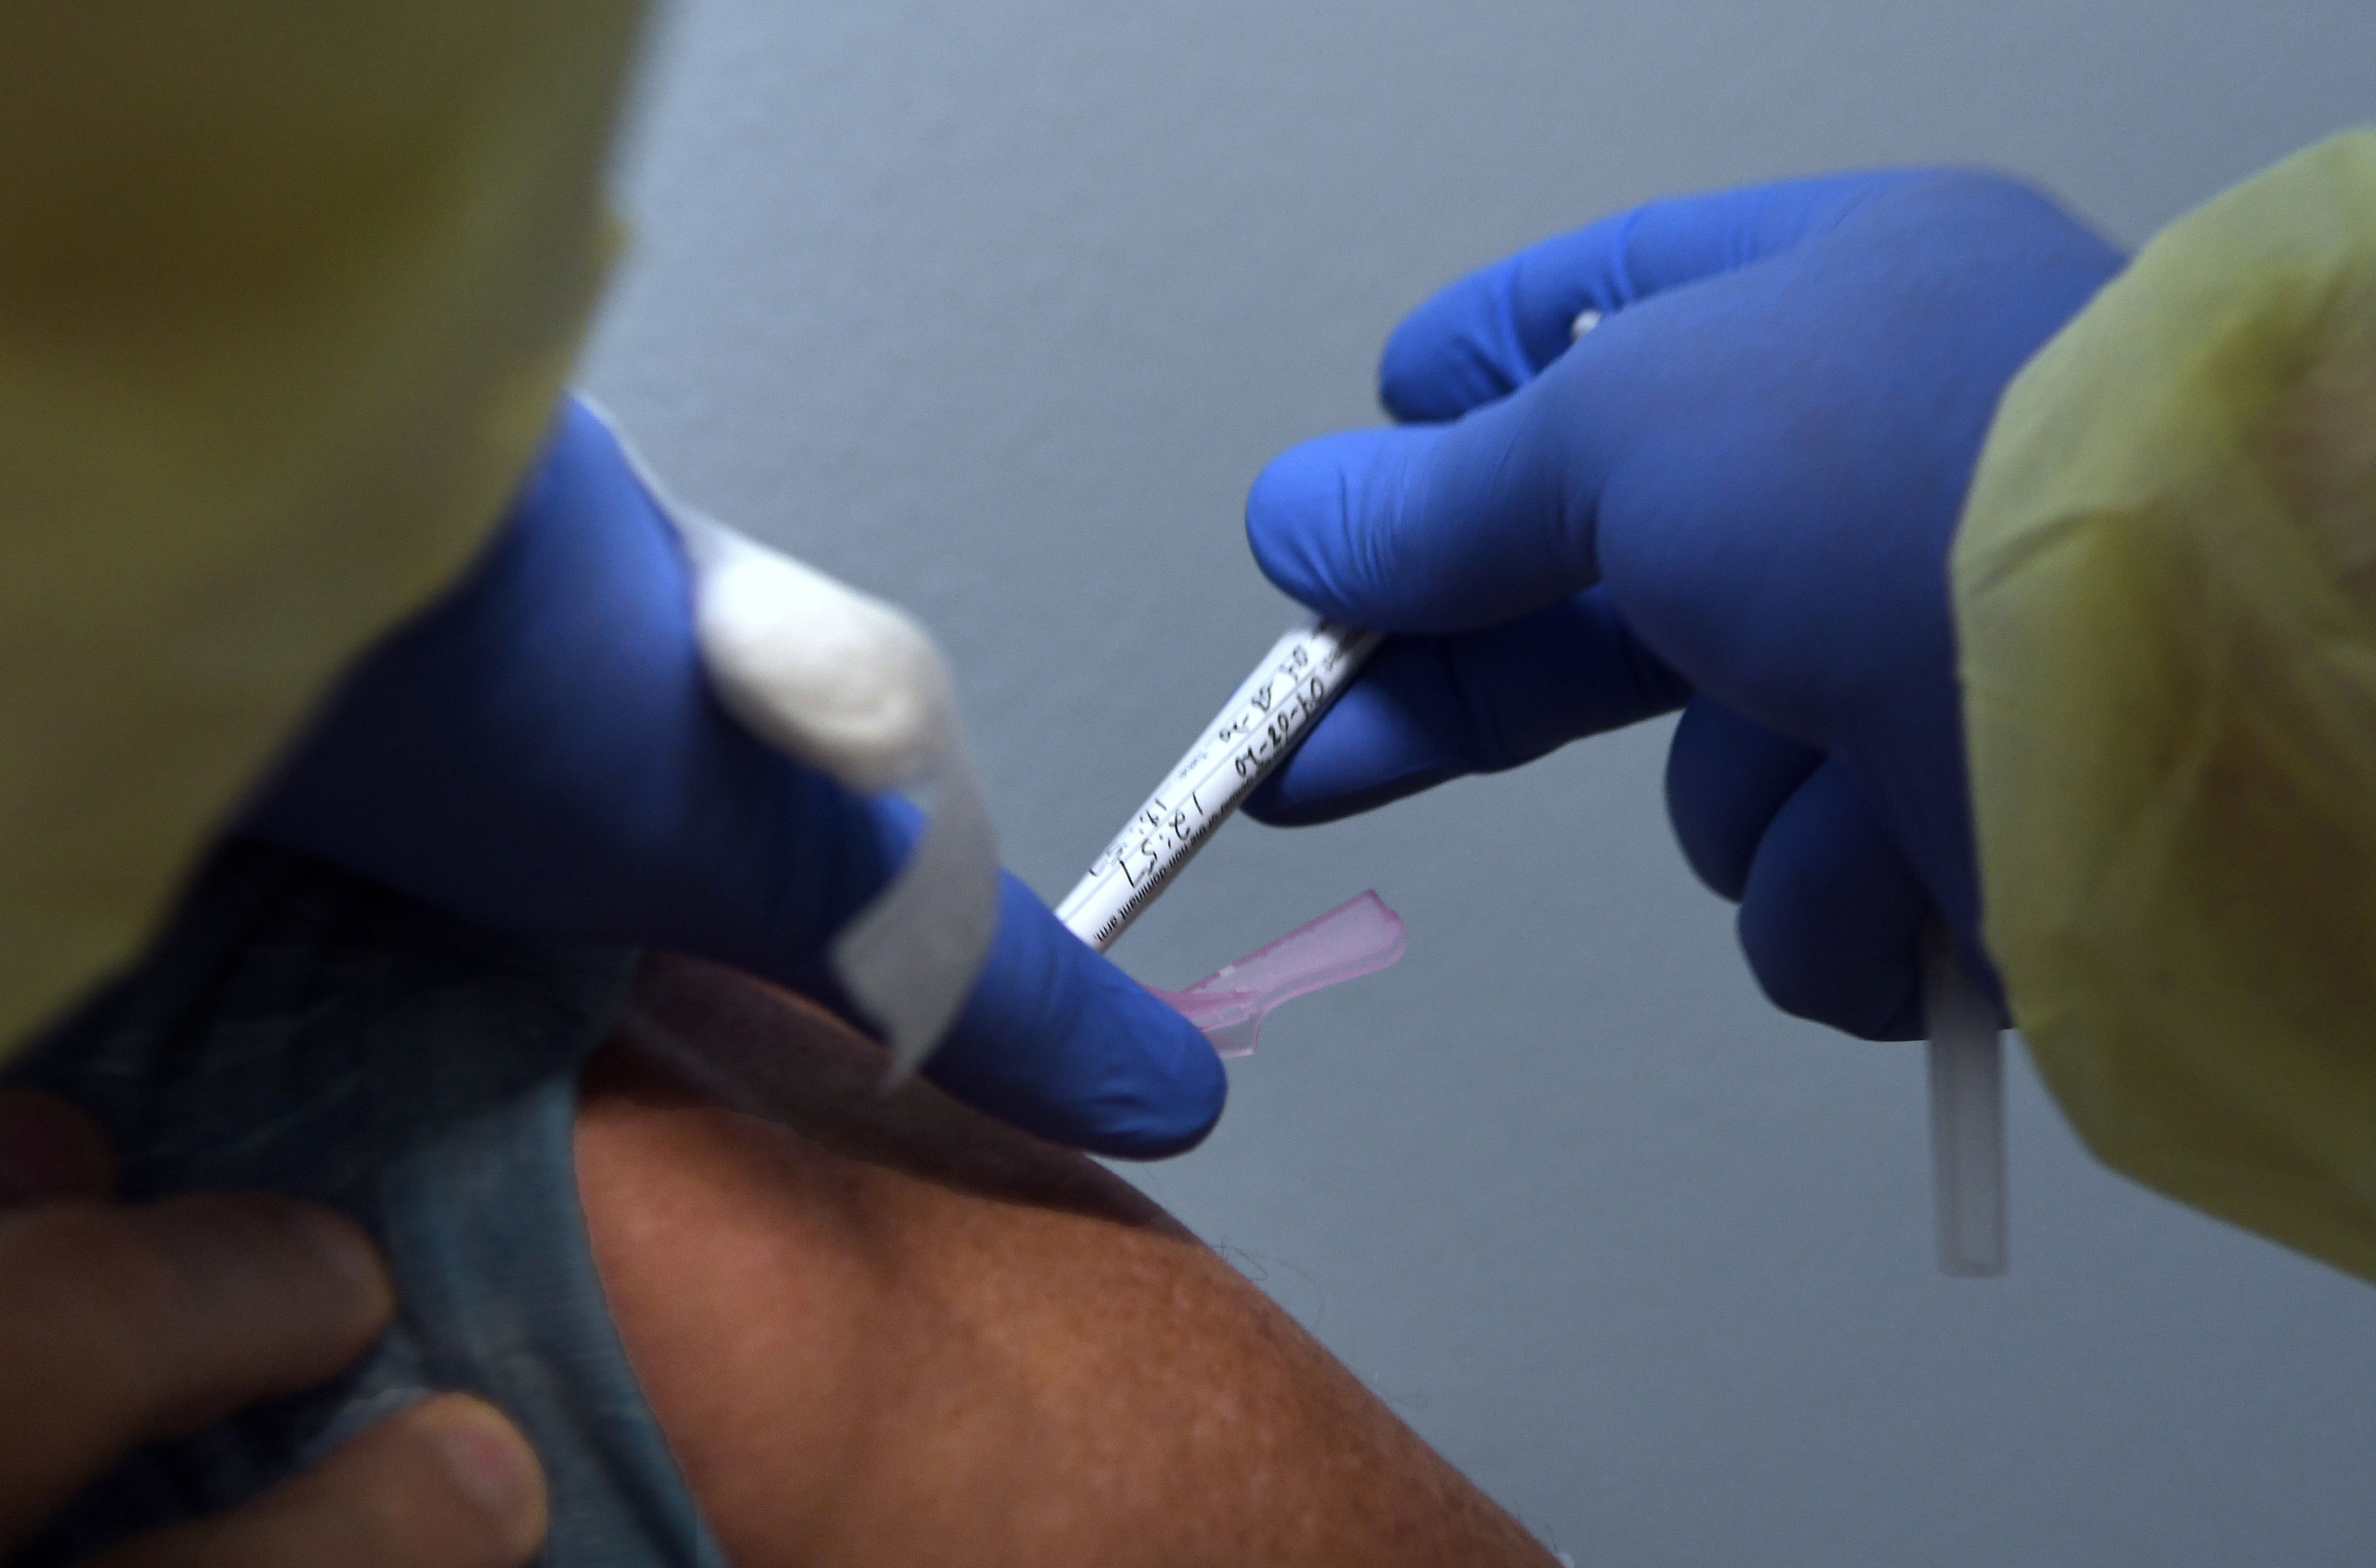 A participant receives an injection in a Phase 3 Covid-19 vaccine clinical trial sponsored by Moderna at Accel Research Sites on August 4, in DeLand, Florida.